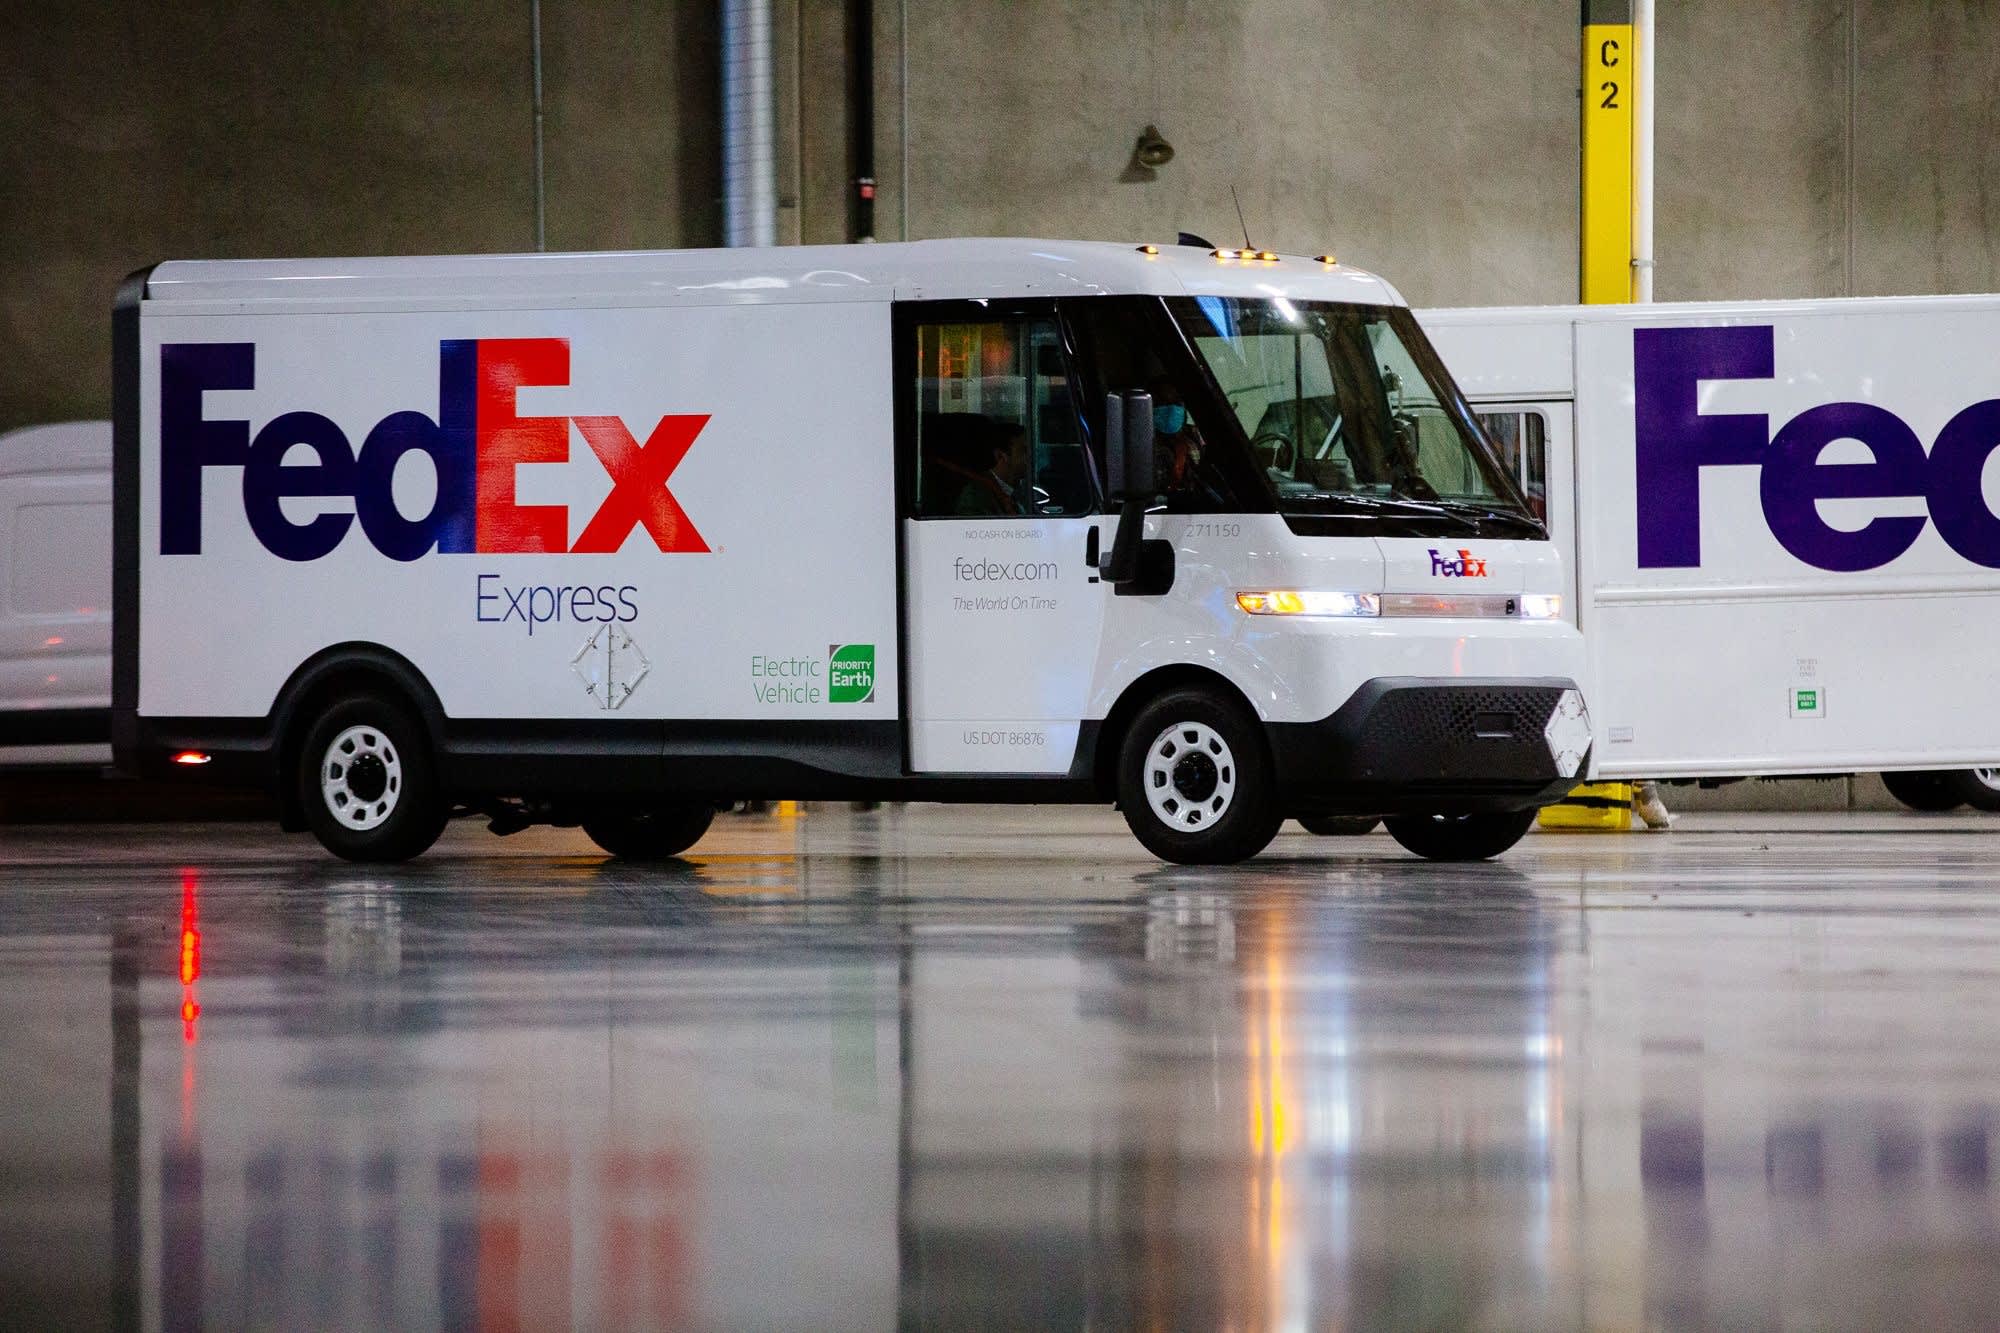 FedEx gets first of 500 electric trucks from GM’s EV unit in move to green logistics